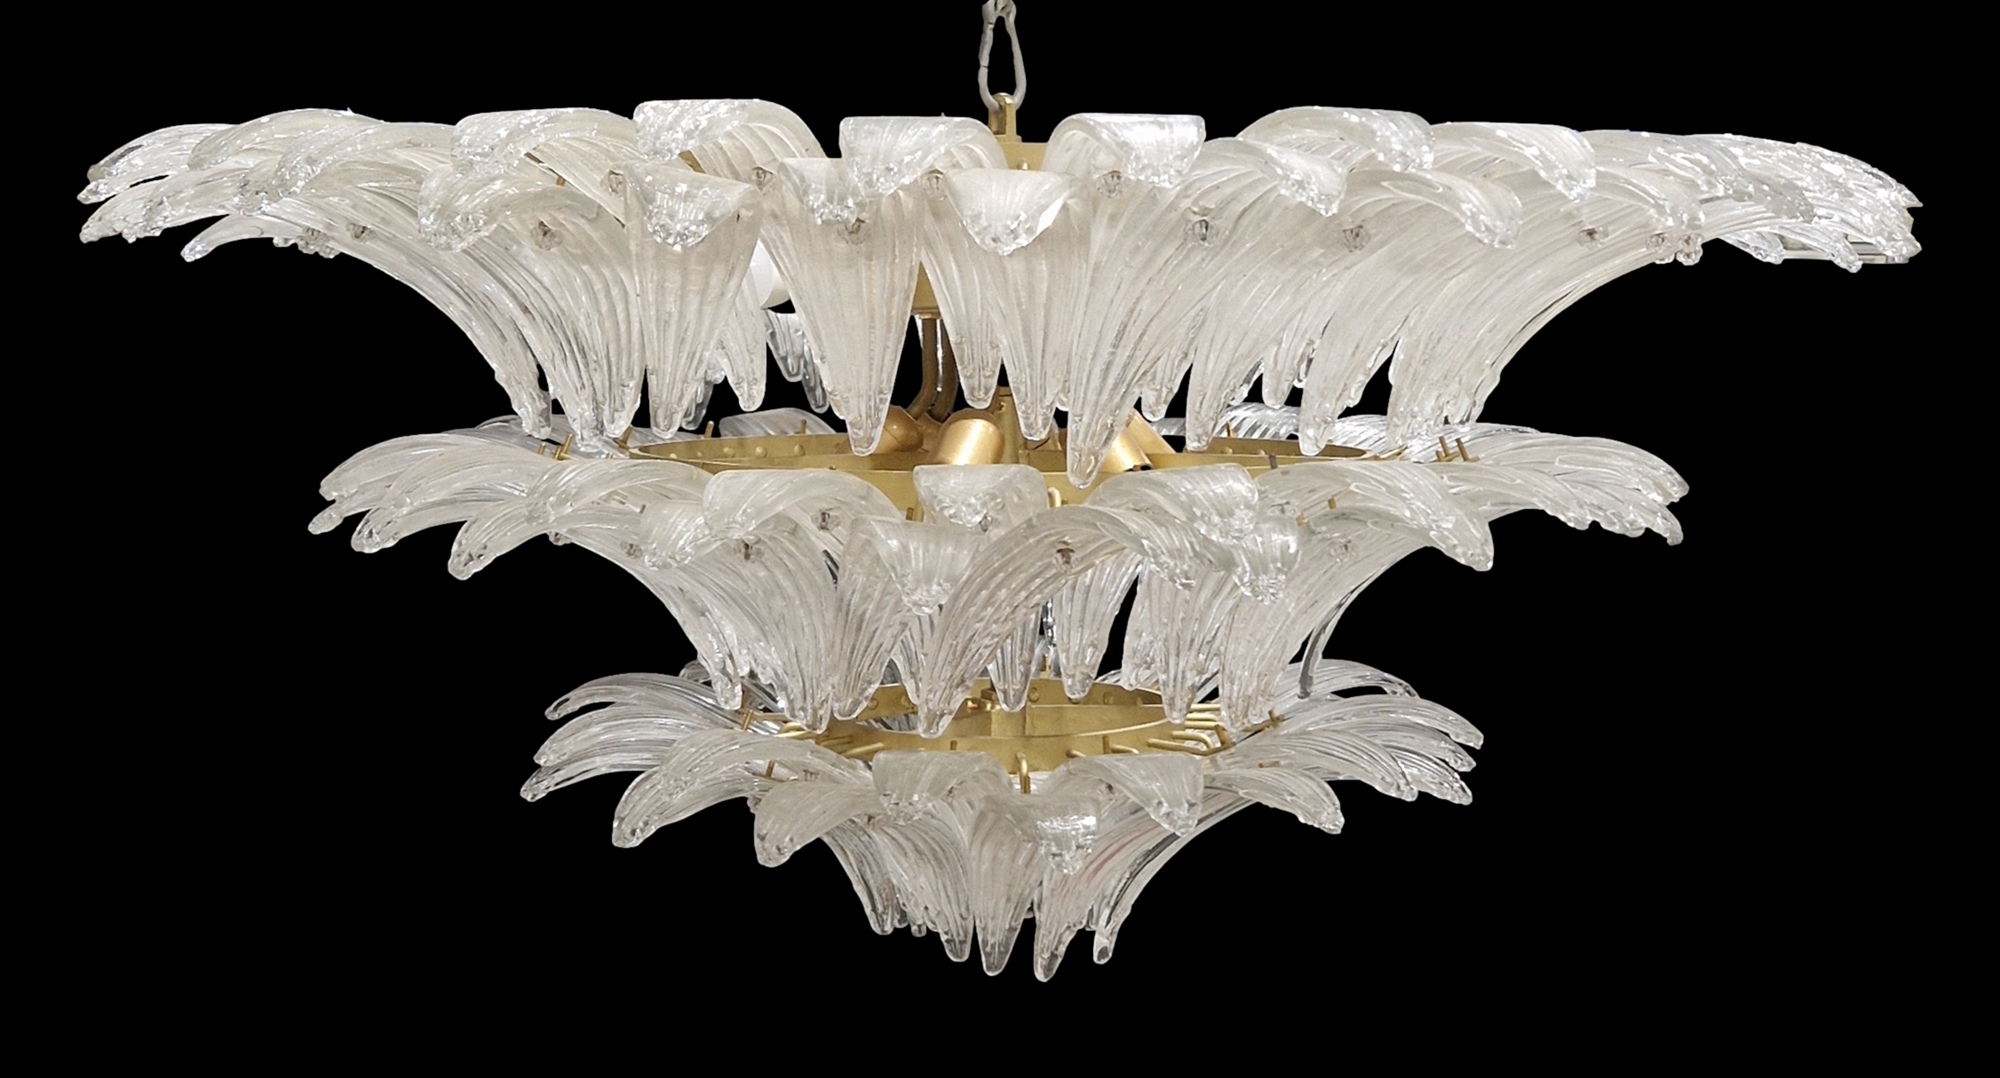 Barovier & Toso Murano glass 'Palmette' three tier suspension lamp/electrolier, model number 5310-6, - Image 2 of 2